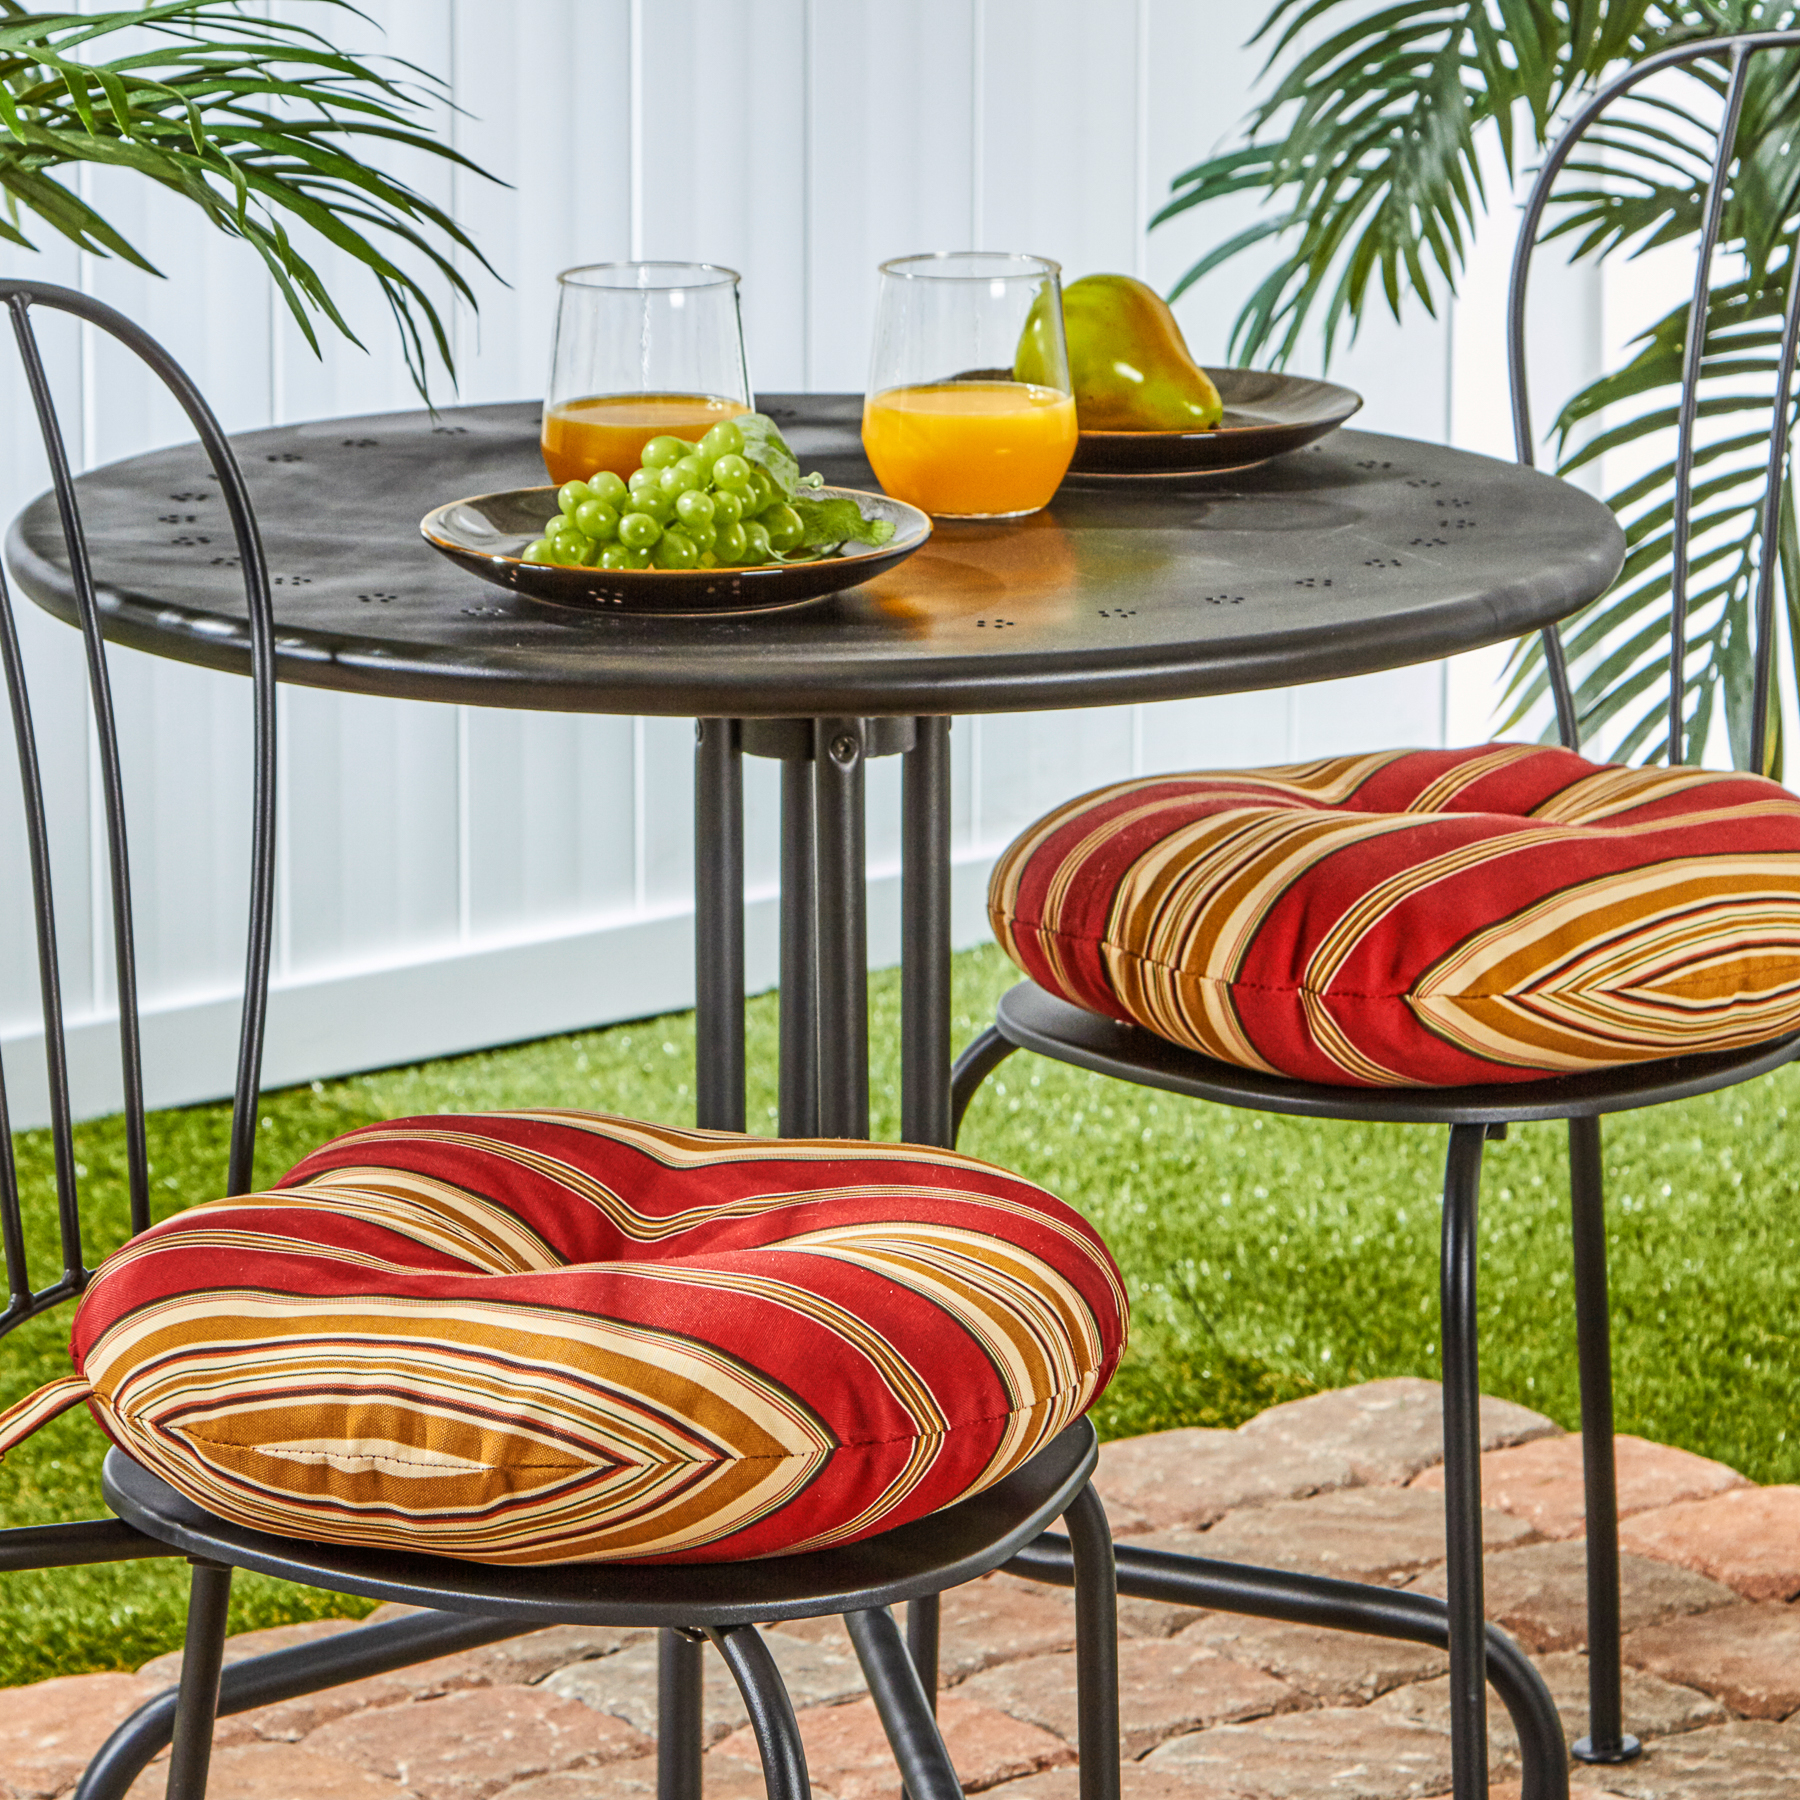 Greendale Home Fashions Roma Stripe 15 in. Round Outdoor Reversible Bistro Seat Cushion (Set of 2) - image 3 of 6